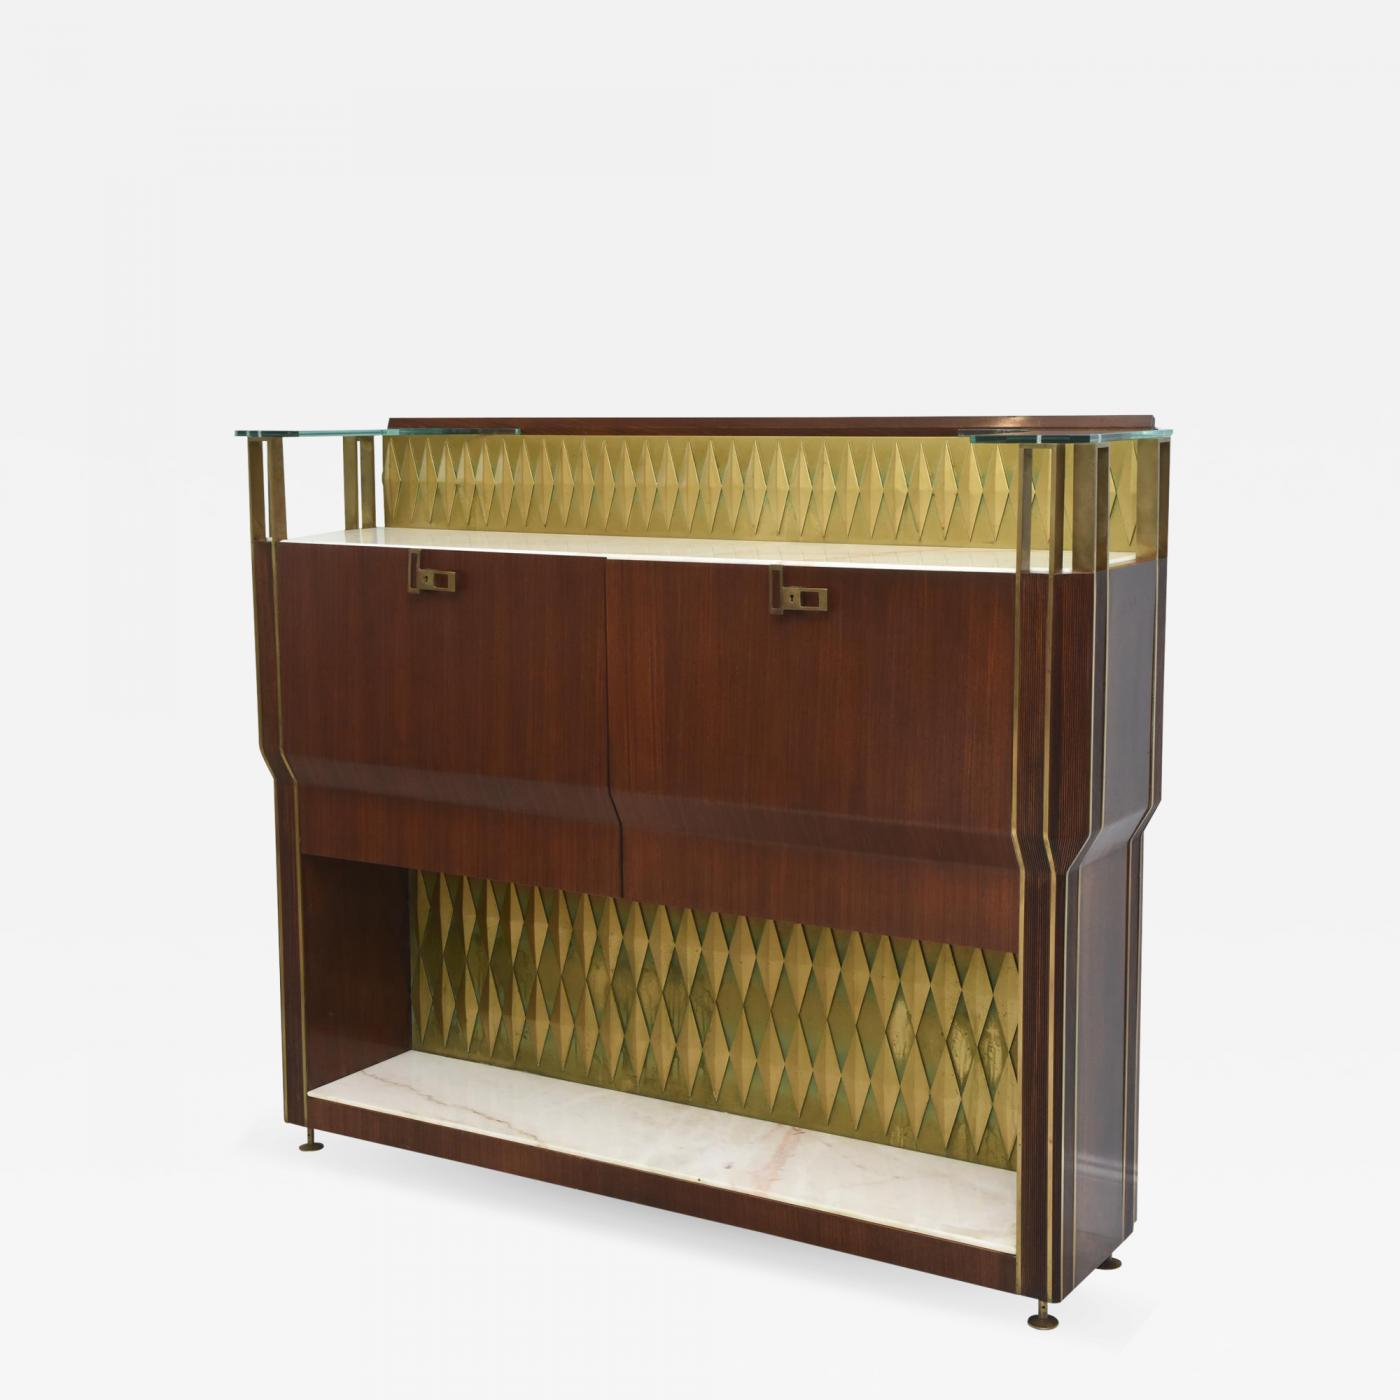 Raphael Furniture France Rare French Modern Mahogany Bronze And Brass Bar Cabinet Raphael with size 1400 X 1400